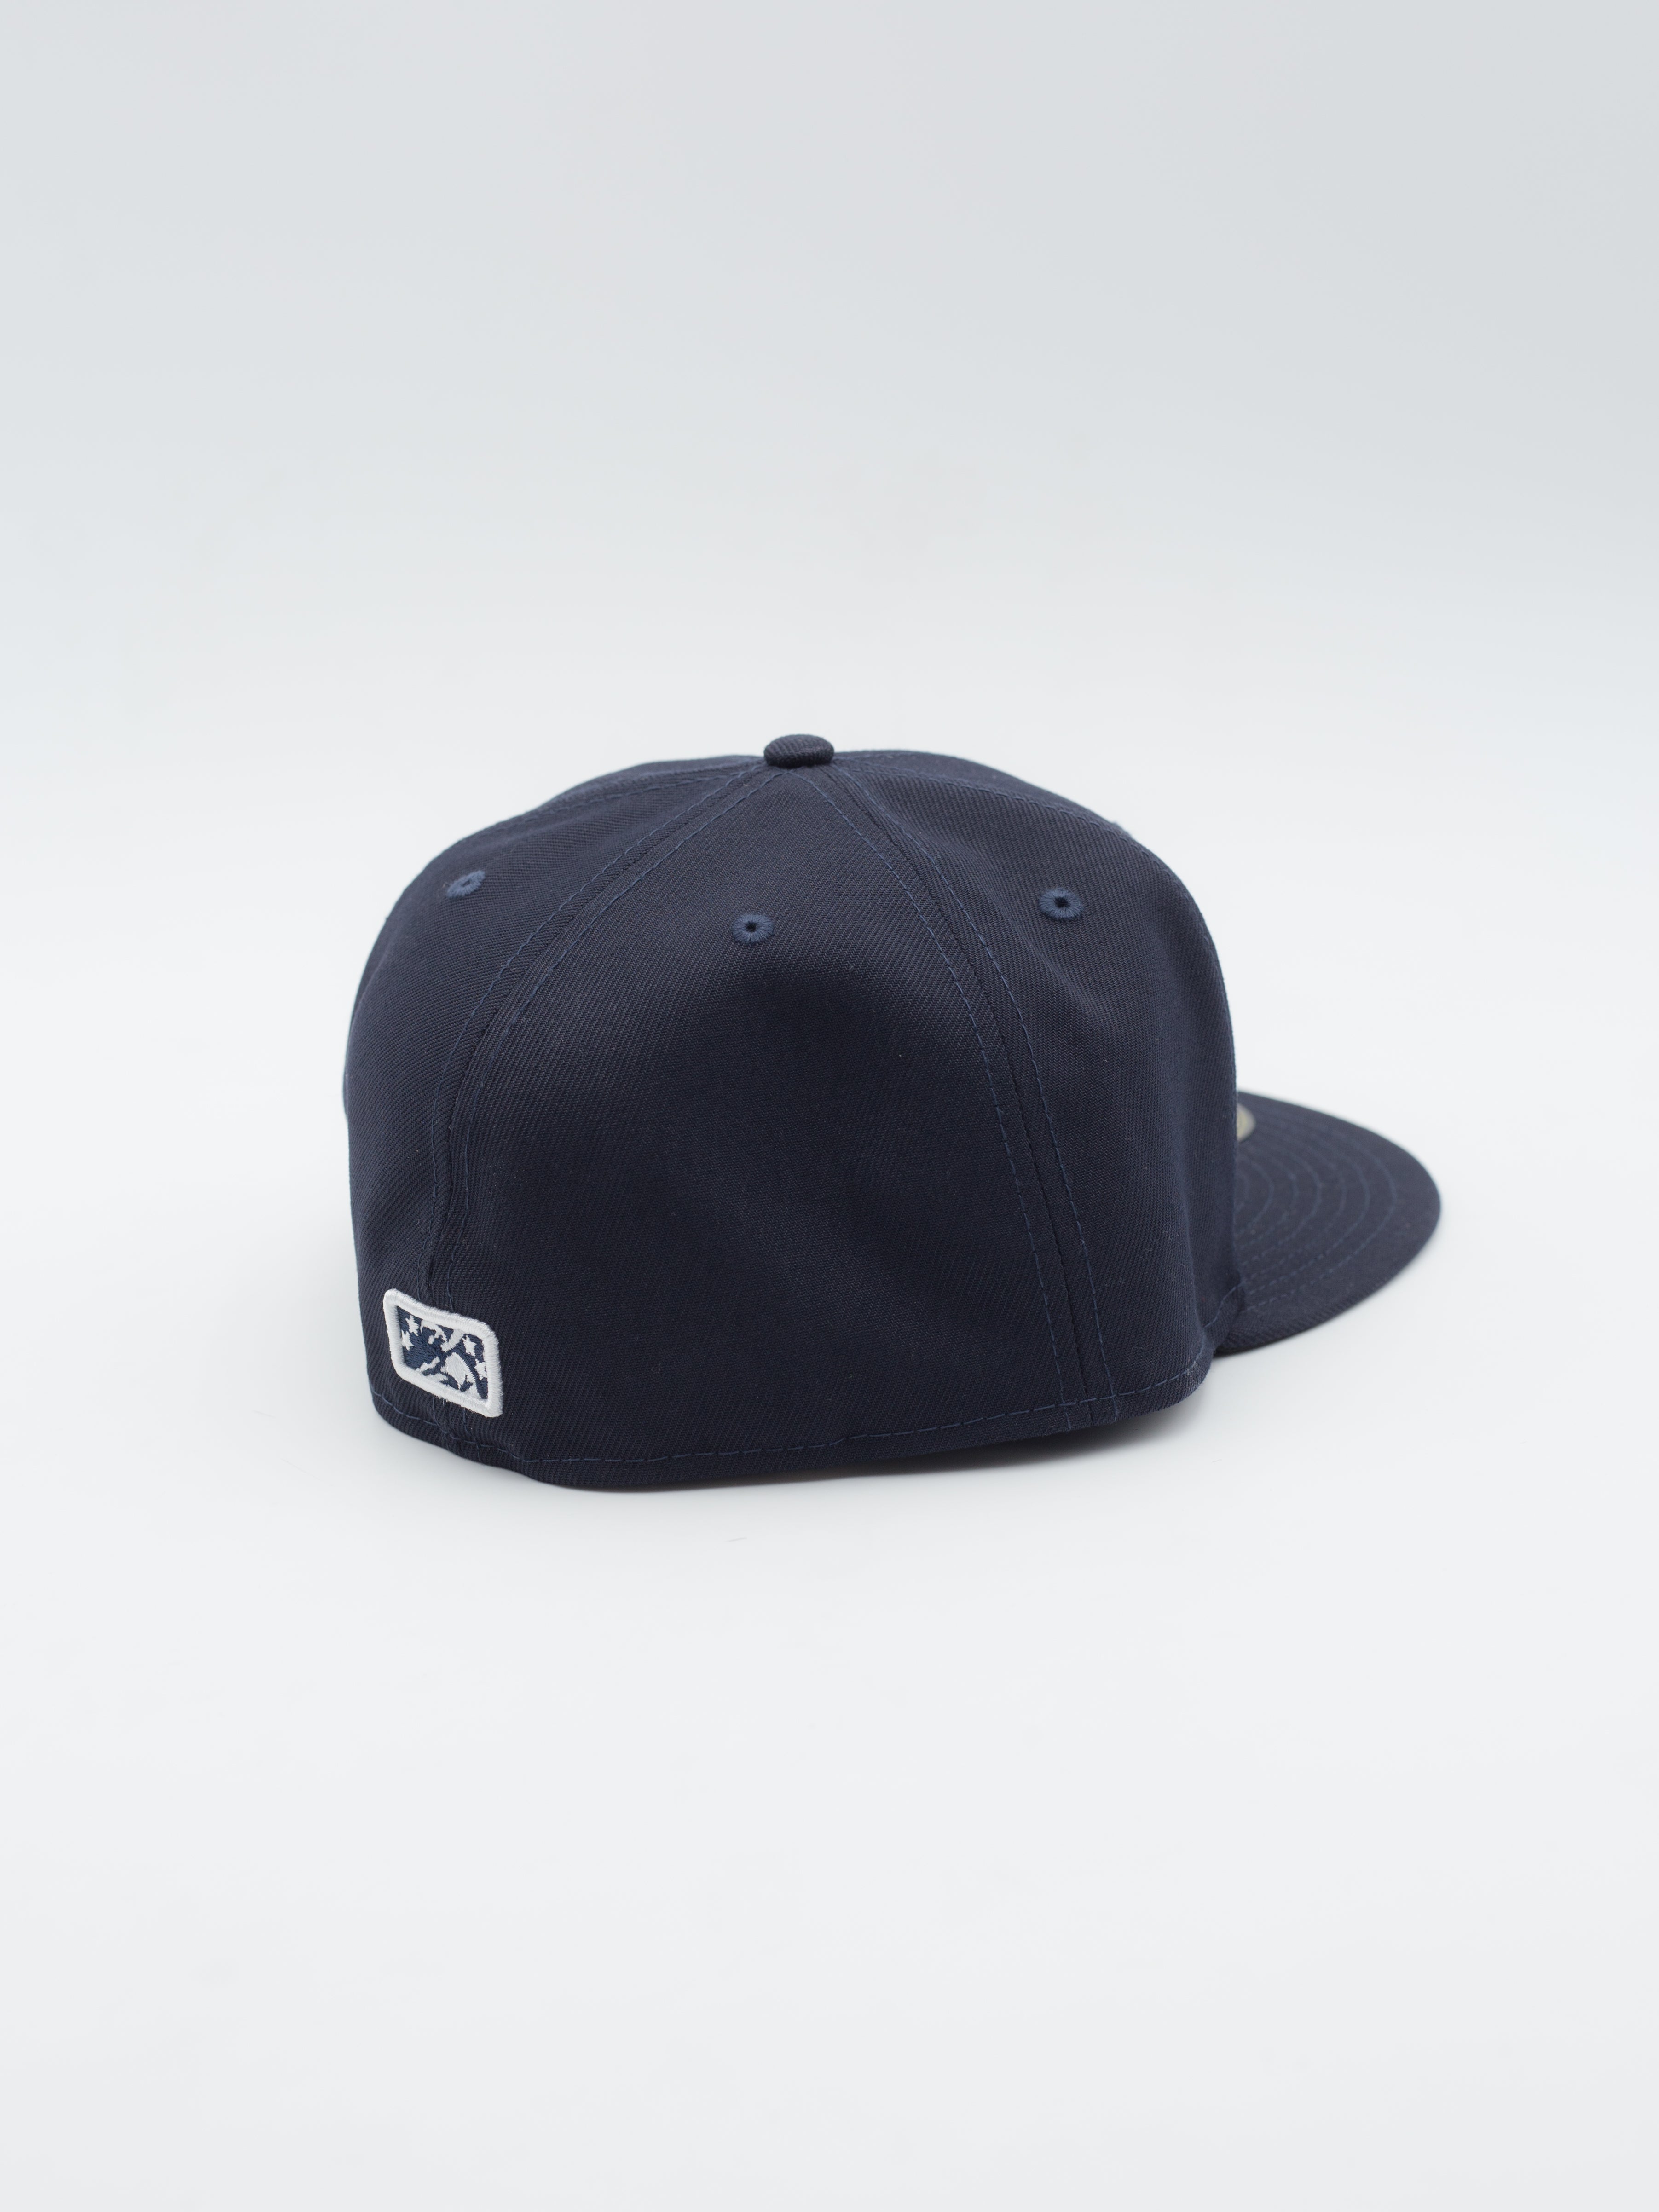 59FIFTY Columbus Clippers MiLB Theme Nights